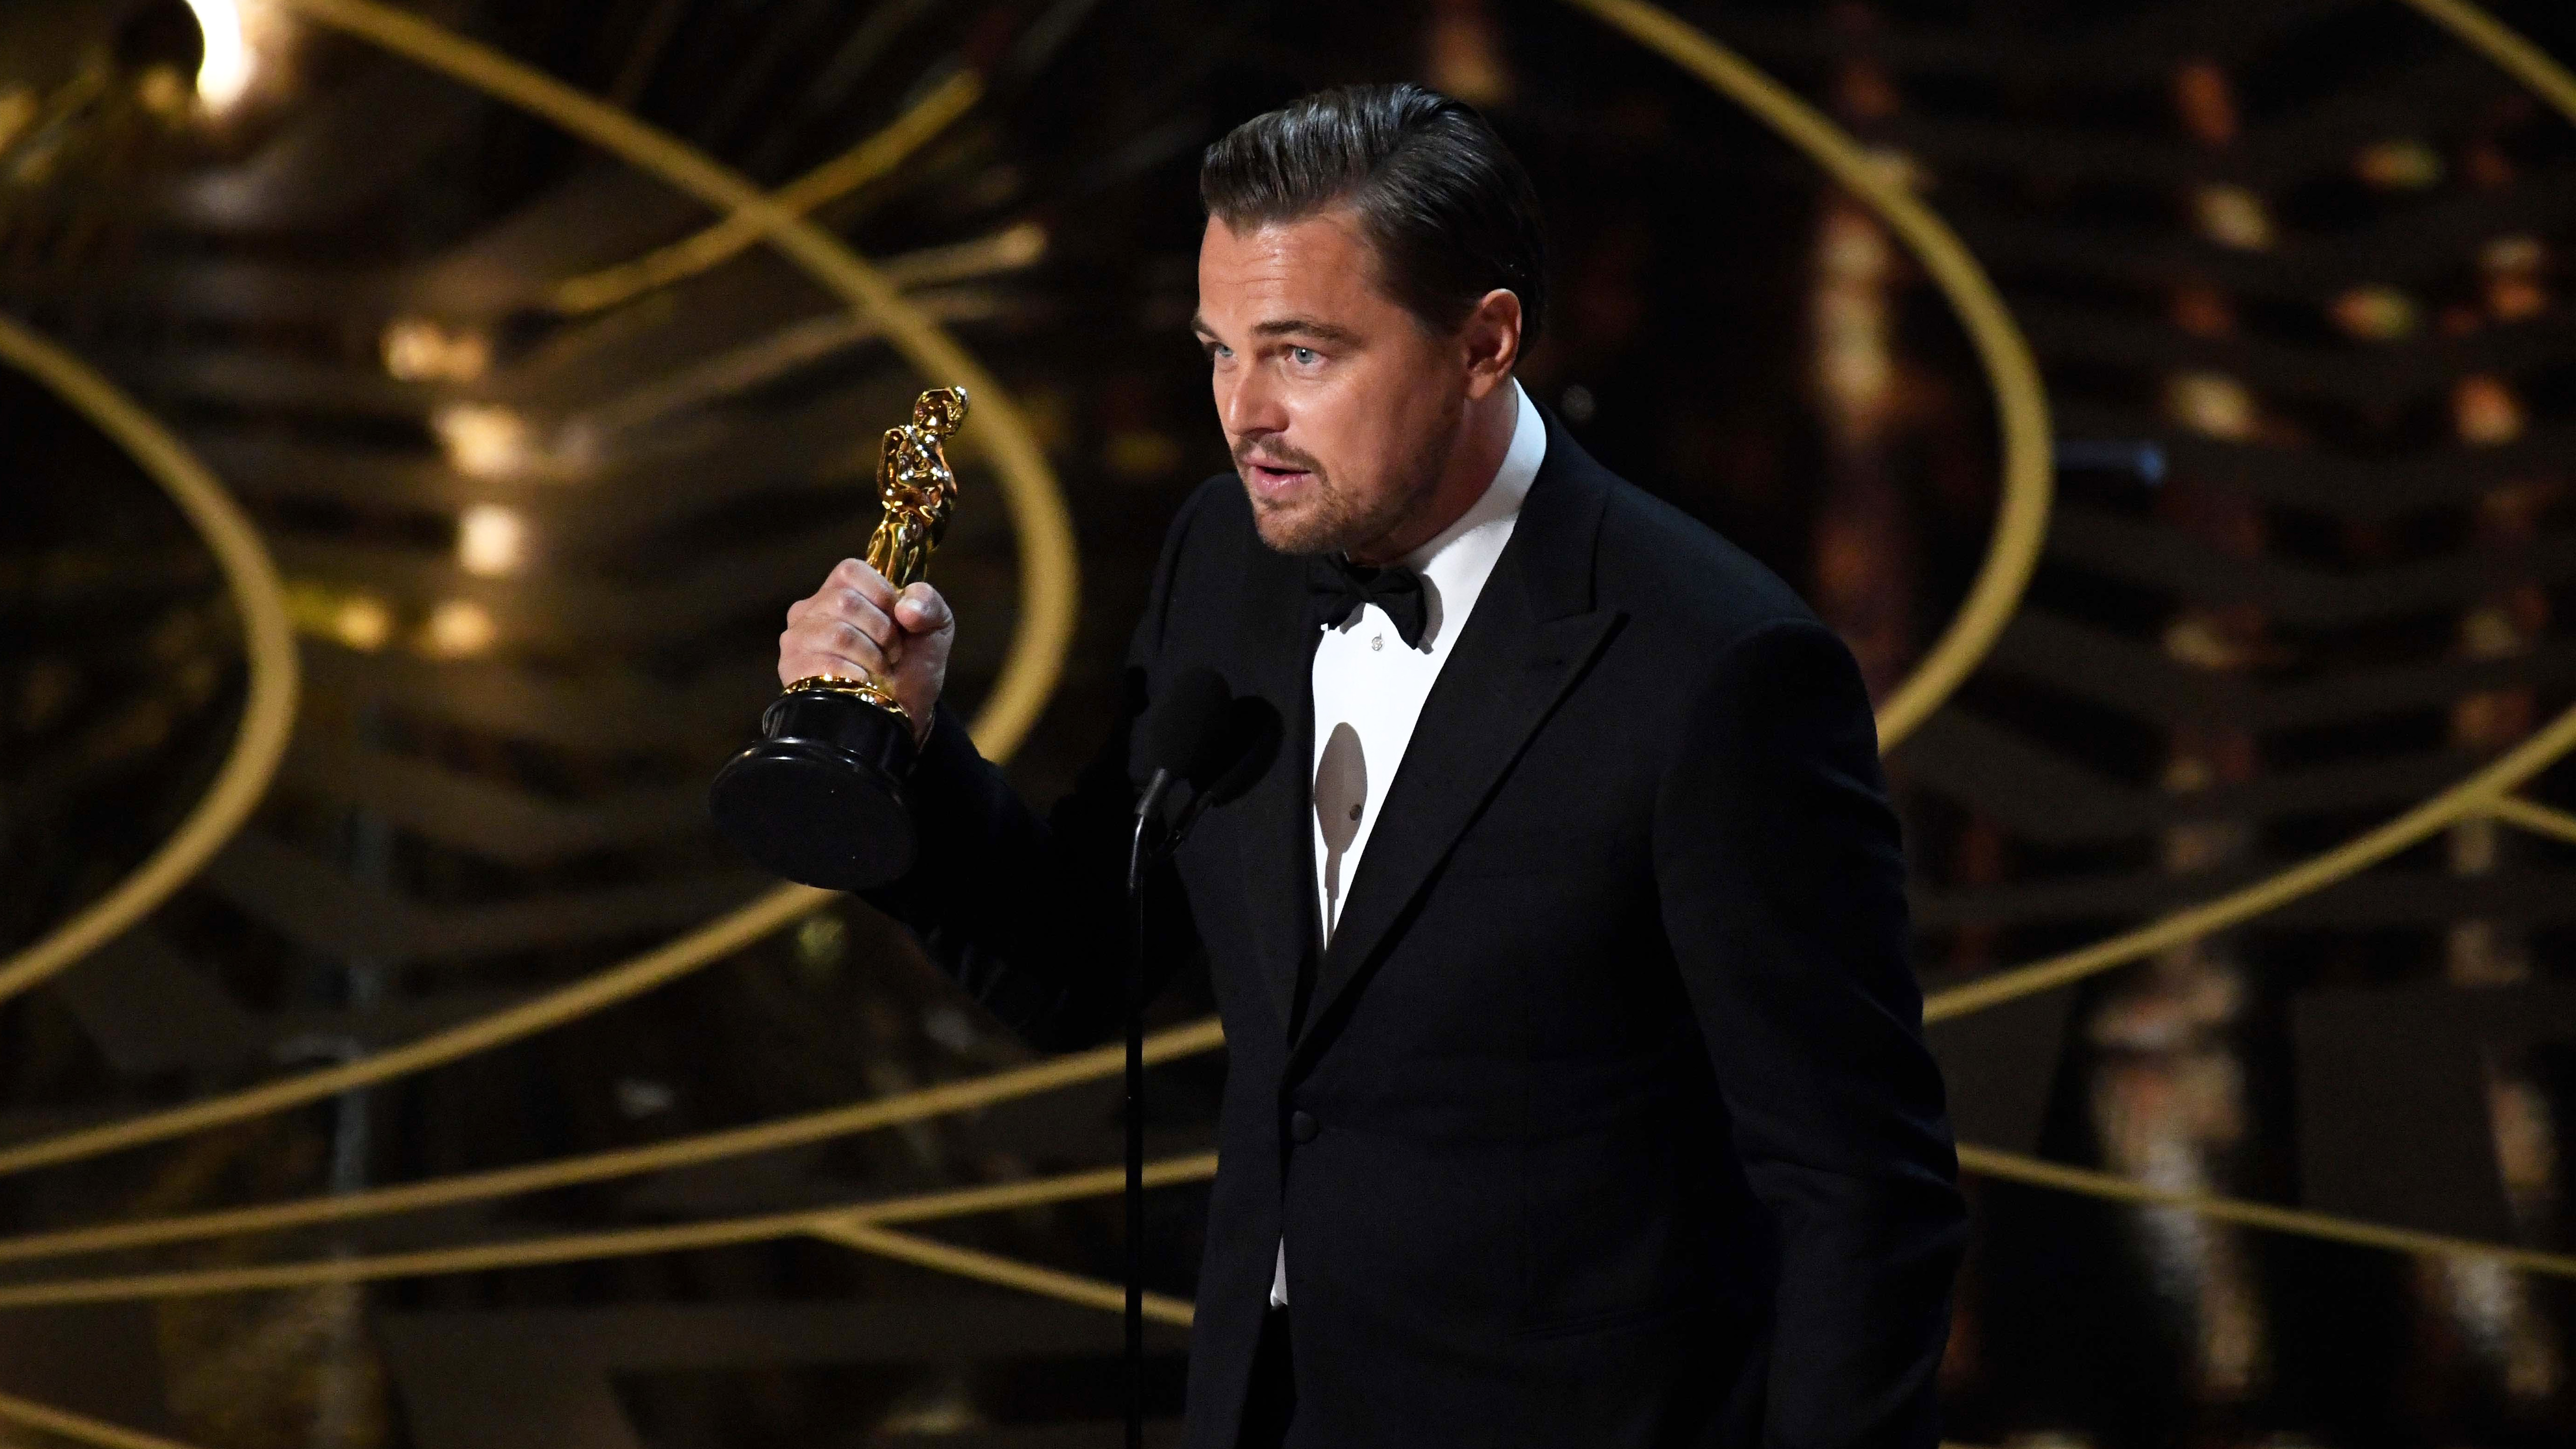 Leonardo DiCaprio holding a trophy while speaking on a microphone